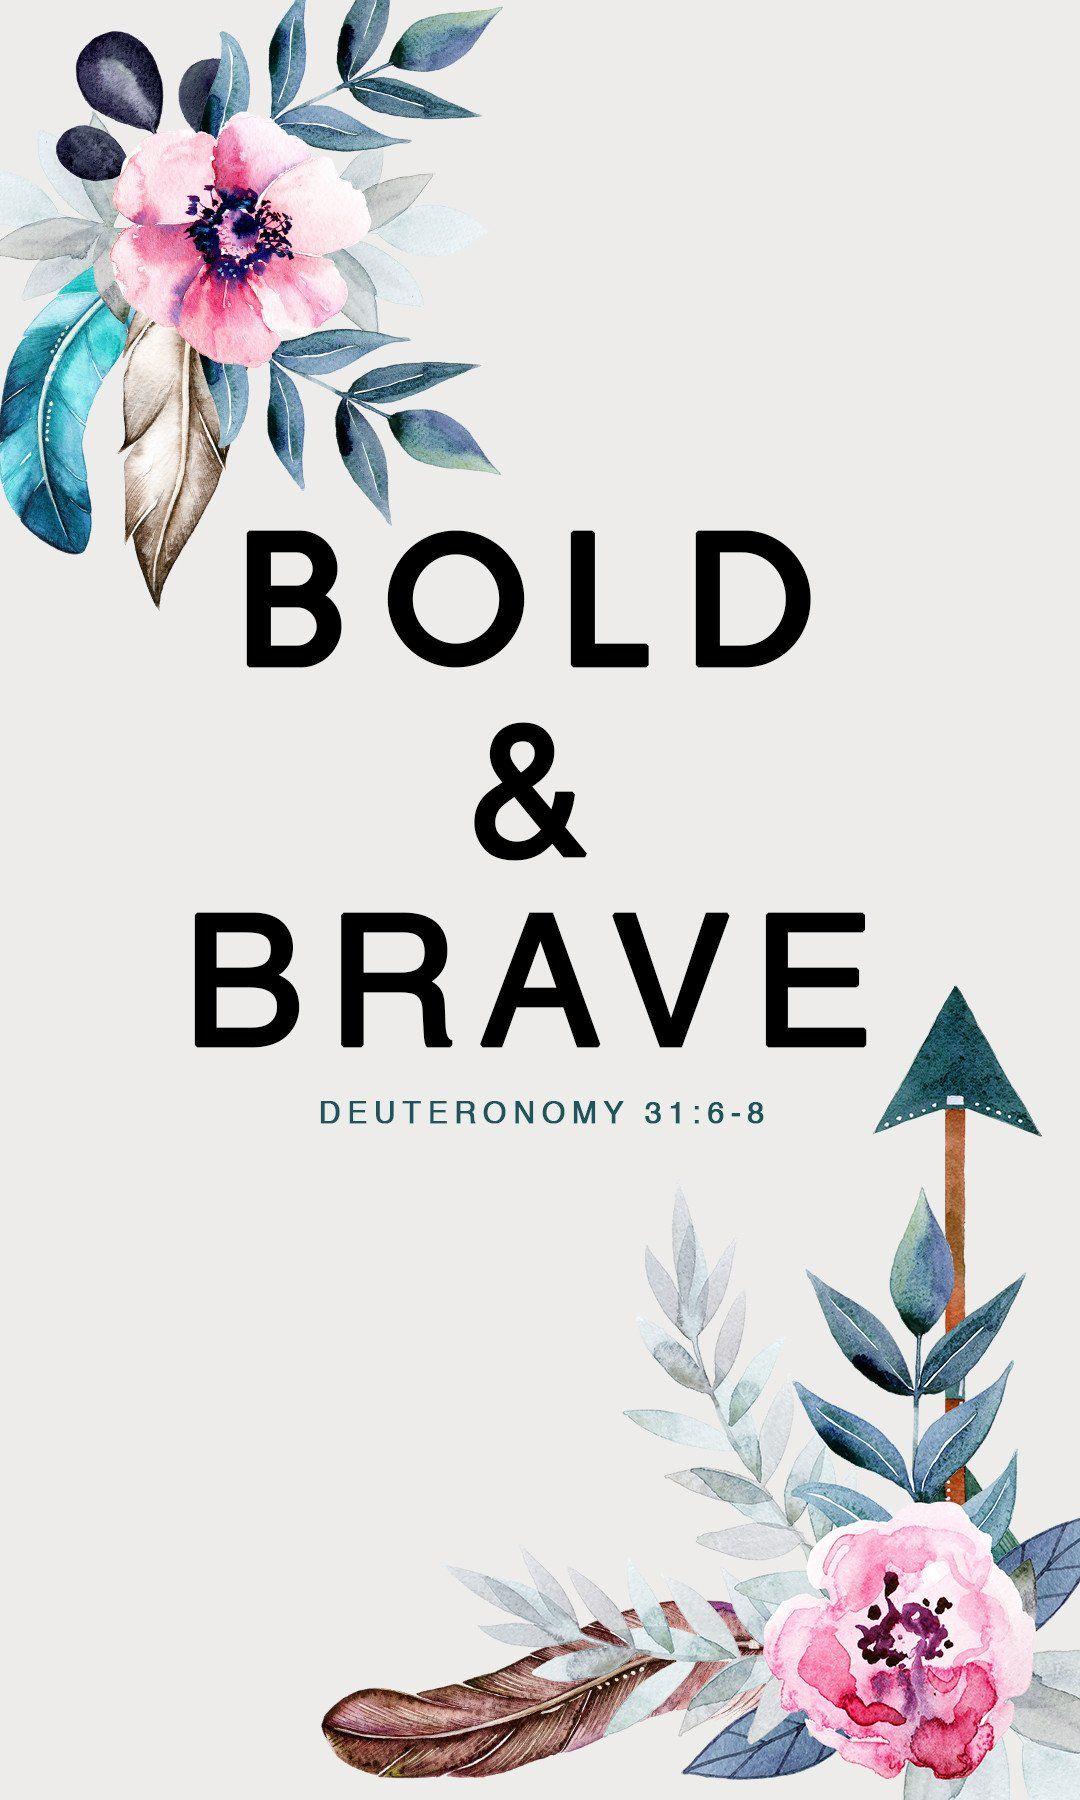 BOLD & BRAVE FREE iPhone Wallpaper from Prone to Wander. Inspiring